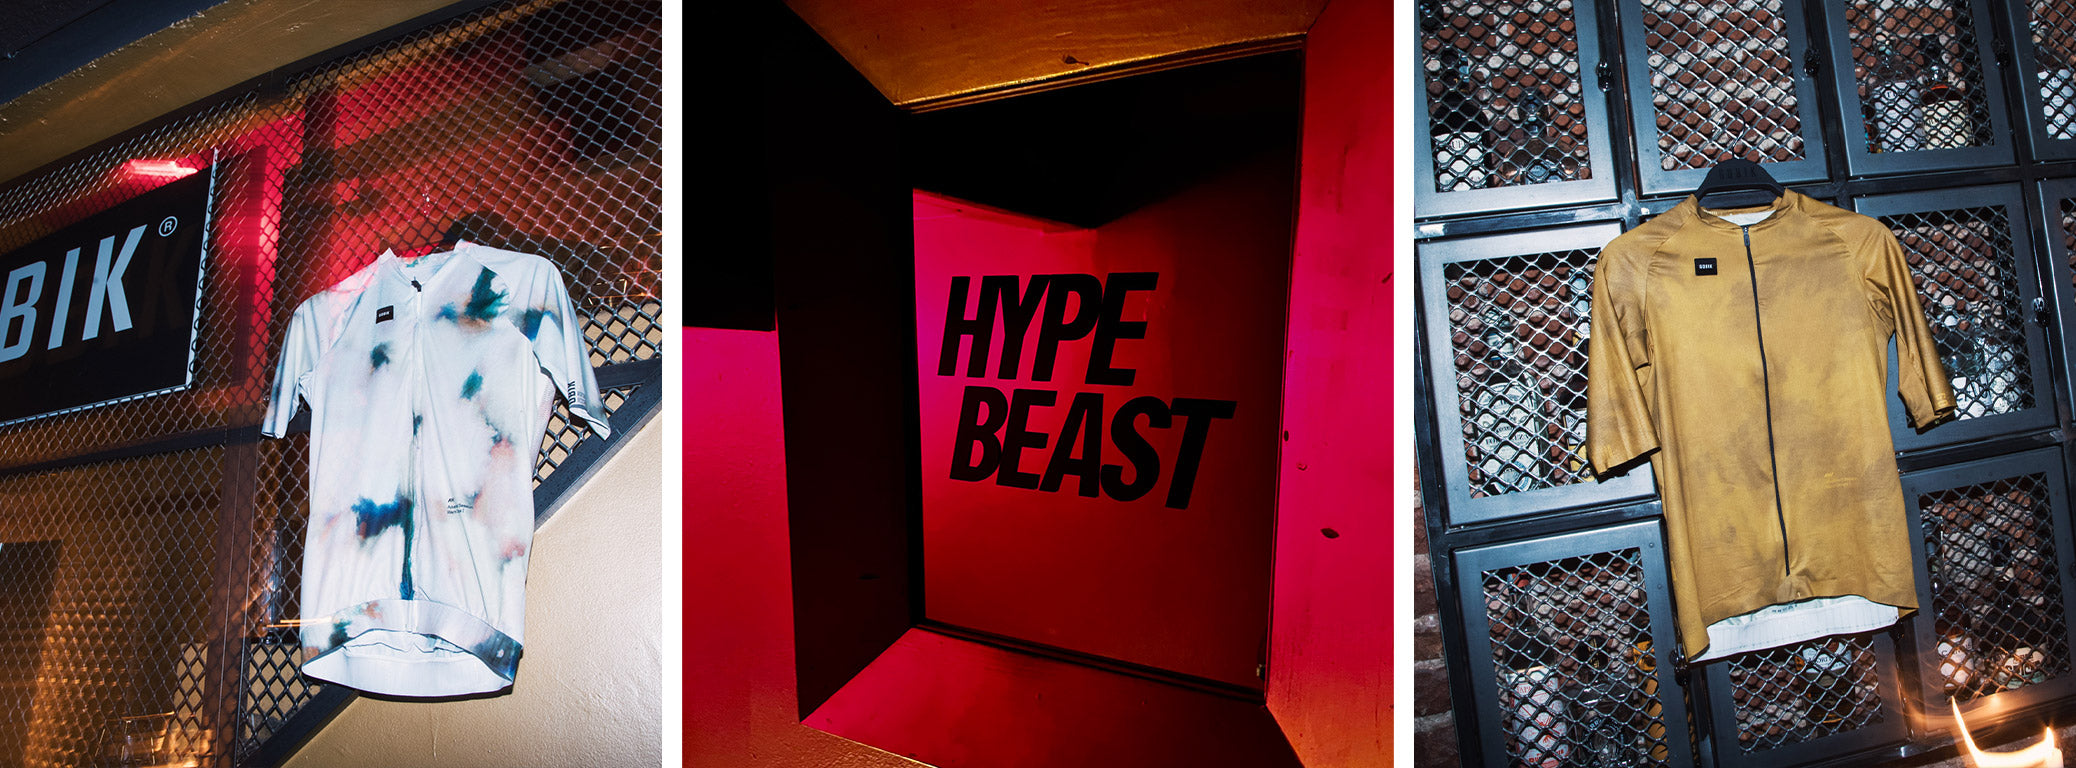 Exhibition of jerseys of the new capsule Hypebeast at the secret party presentation